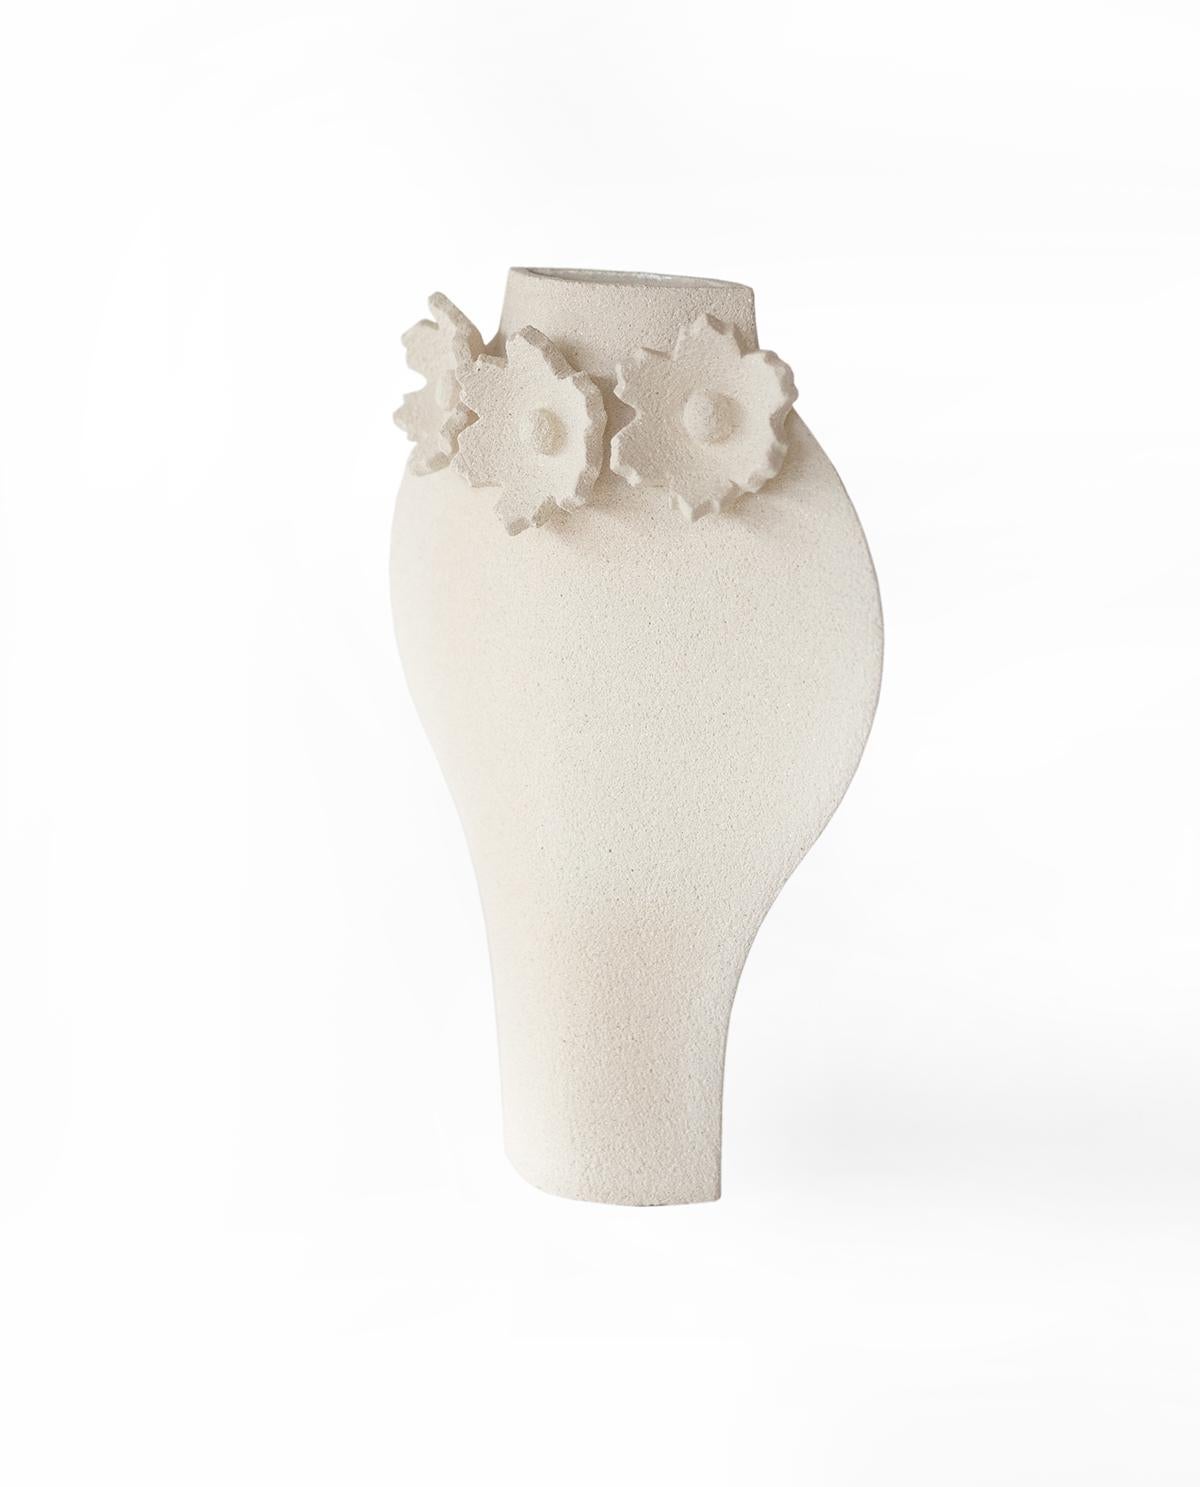 'Sculptural Flowers - Dal' handmade white ceramic vase

This vase is part of a new series inspired by flowers (and more generally organic elements). Here is our best-selling 'Dal' model with motifs of flowers. They are hand-sculpted and attached